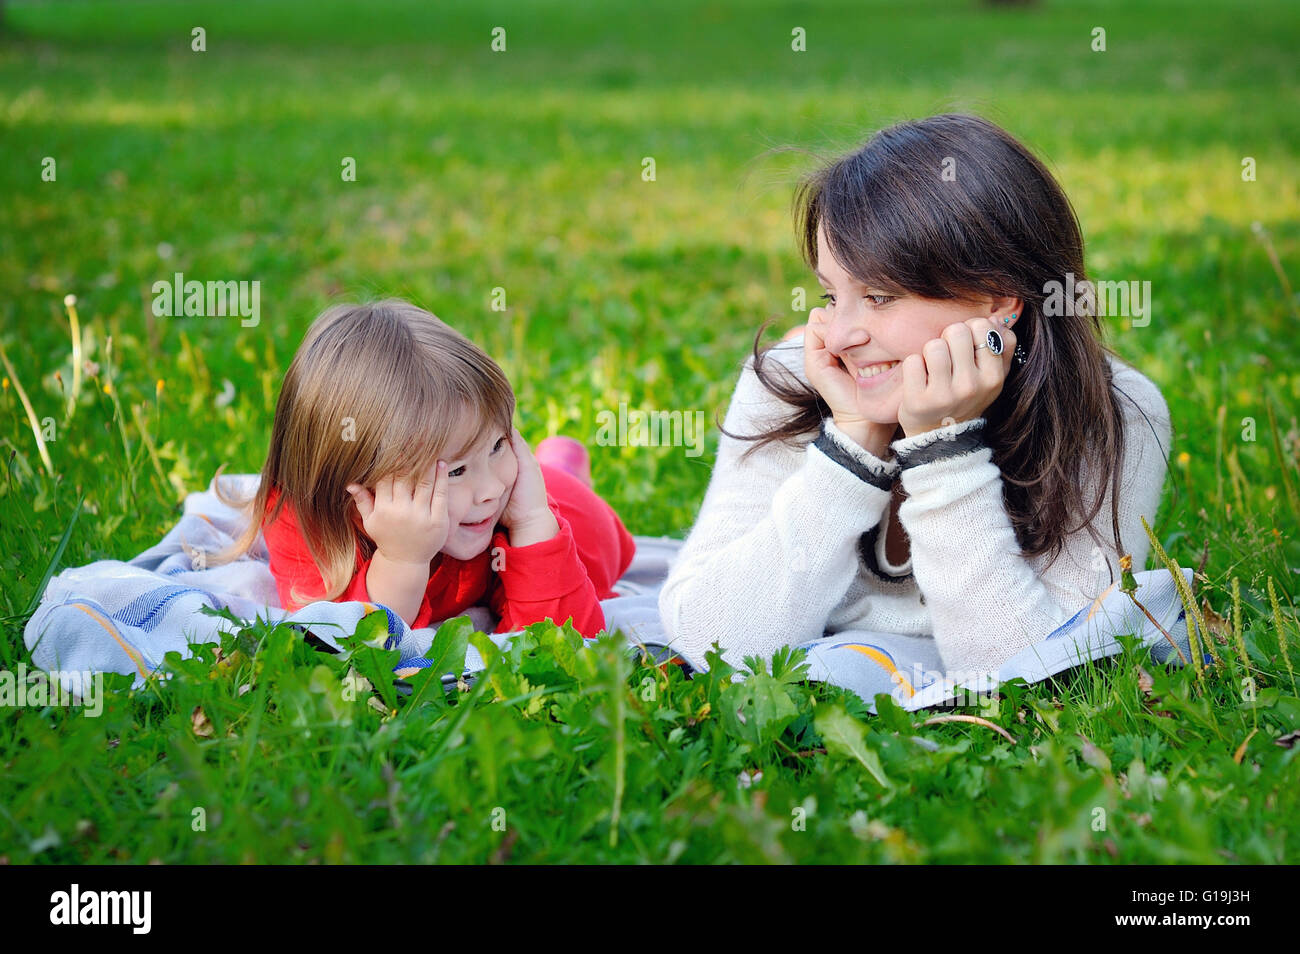 Portrait of smiling beautiful young woman and her little daughte Stock Photo